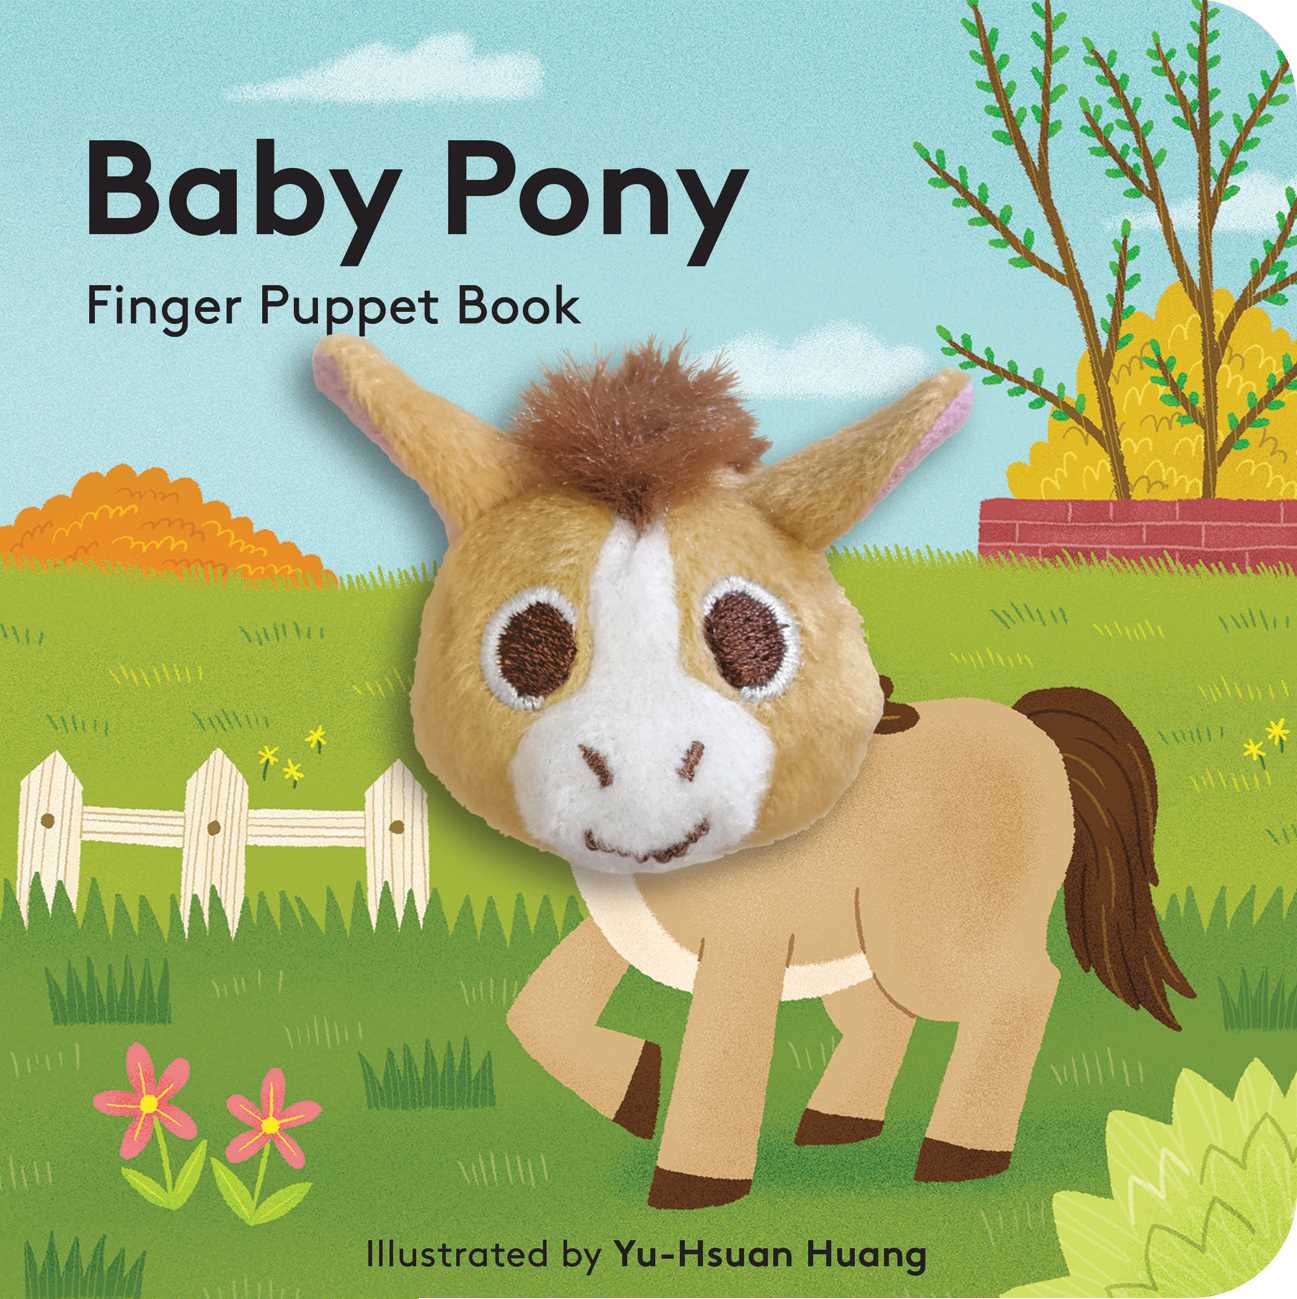 Baby Pony (Finger Puppet Book)